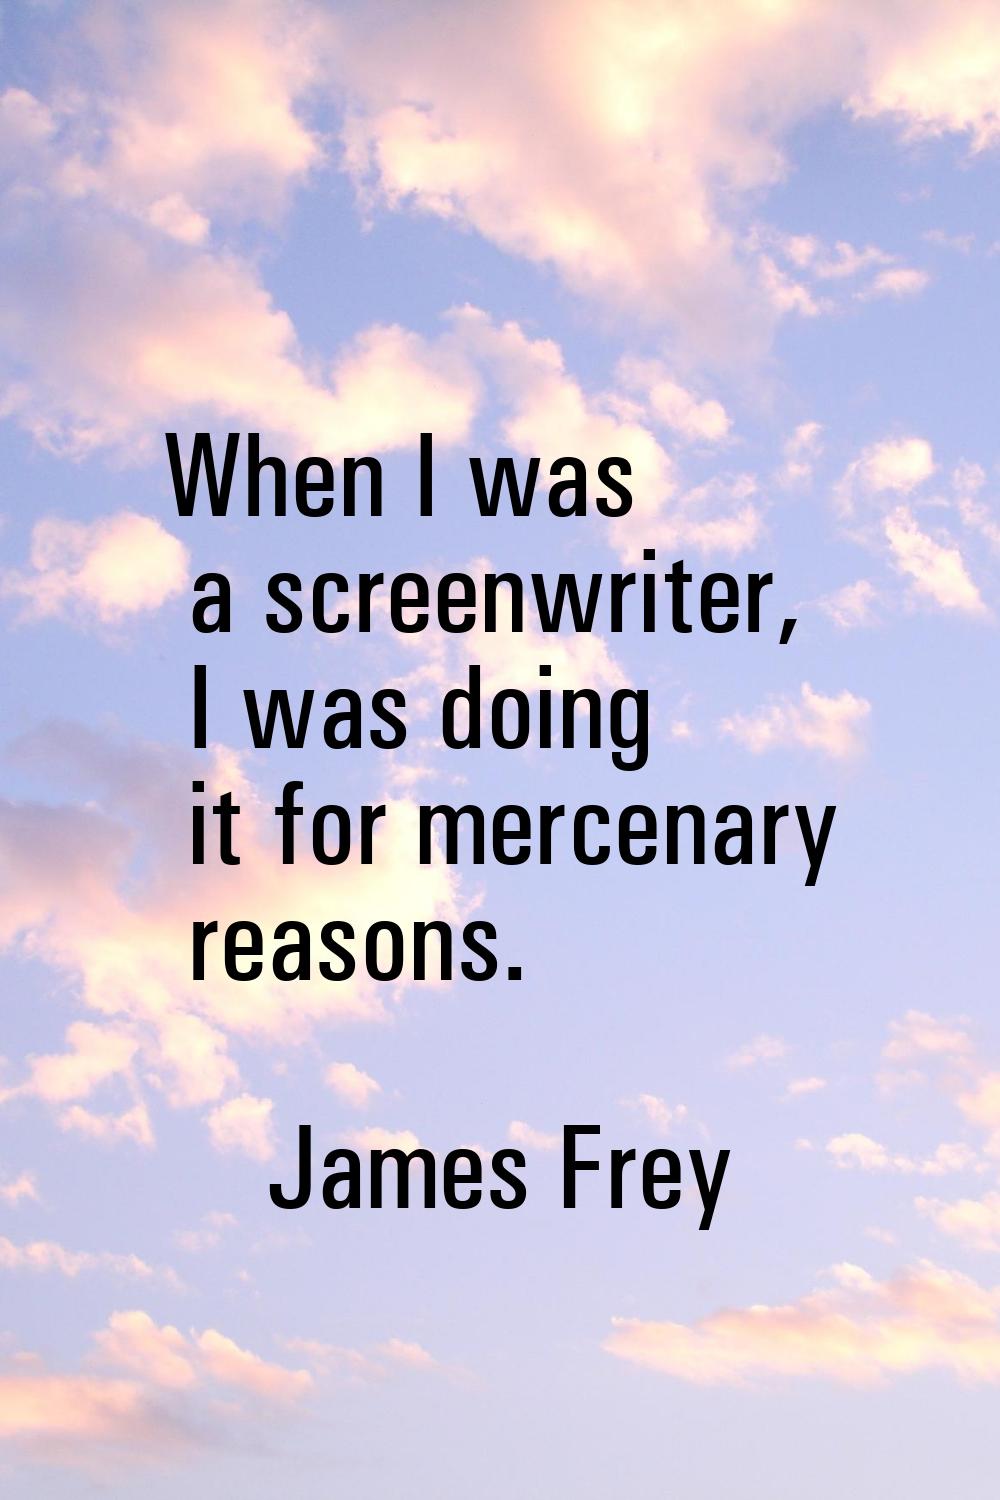 When I was a screenwriter, I was doing it for mercenary reasons.